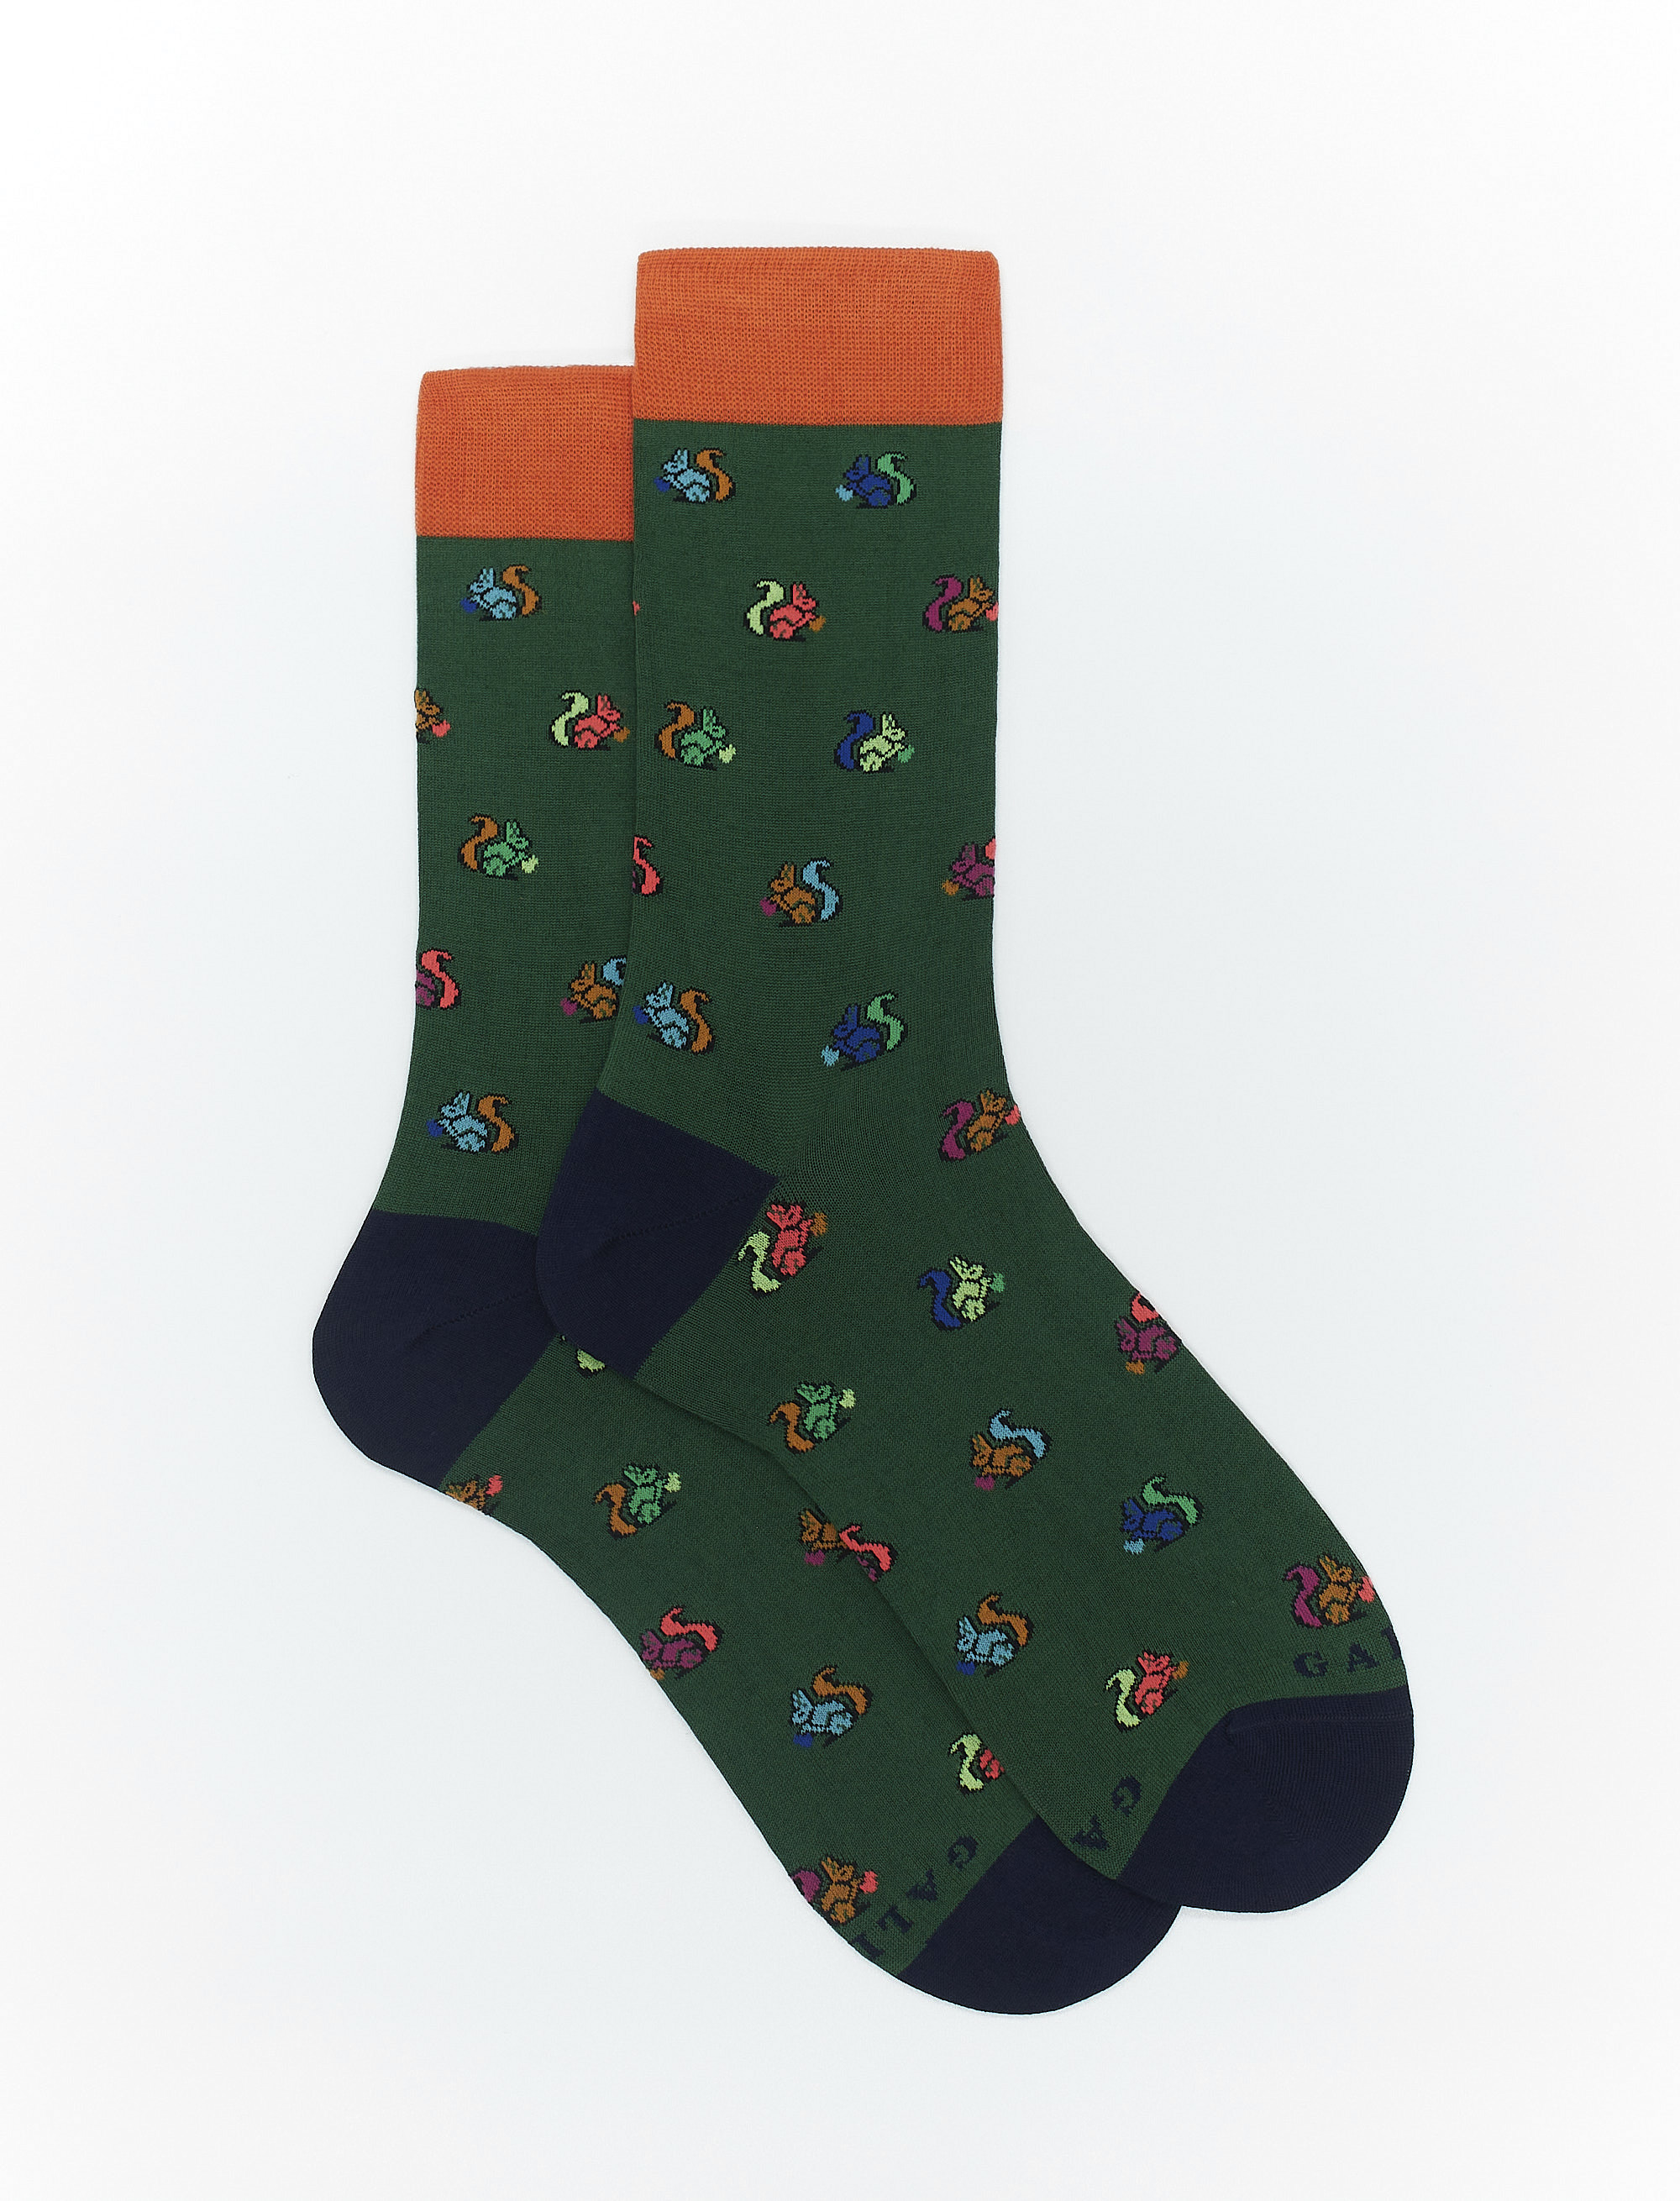 Women's short billiard green light cotton socks with squirrel motif - The FW Edition | Gallo 1927 - Official Online Shop